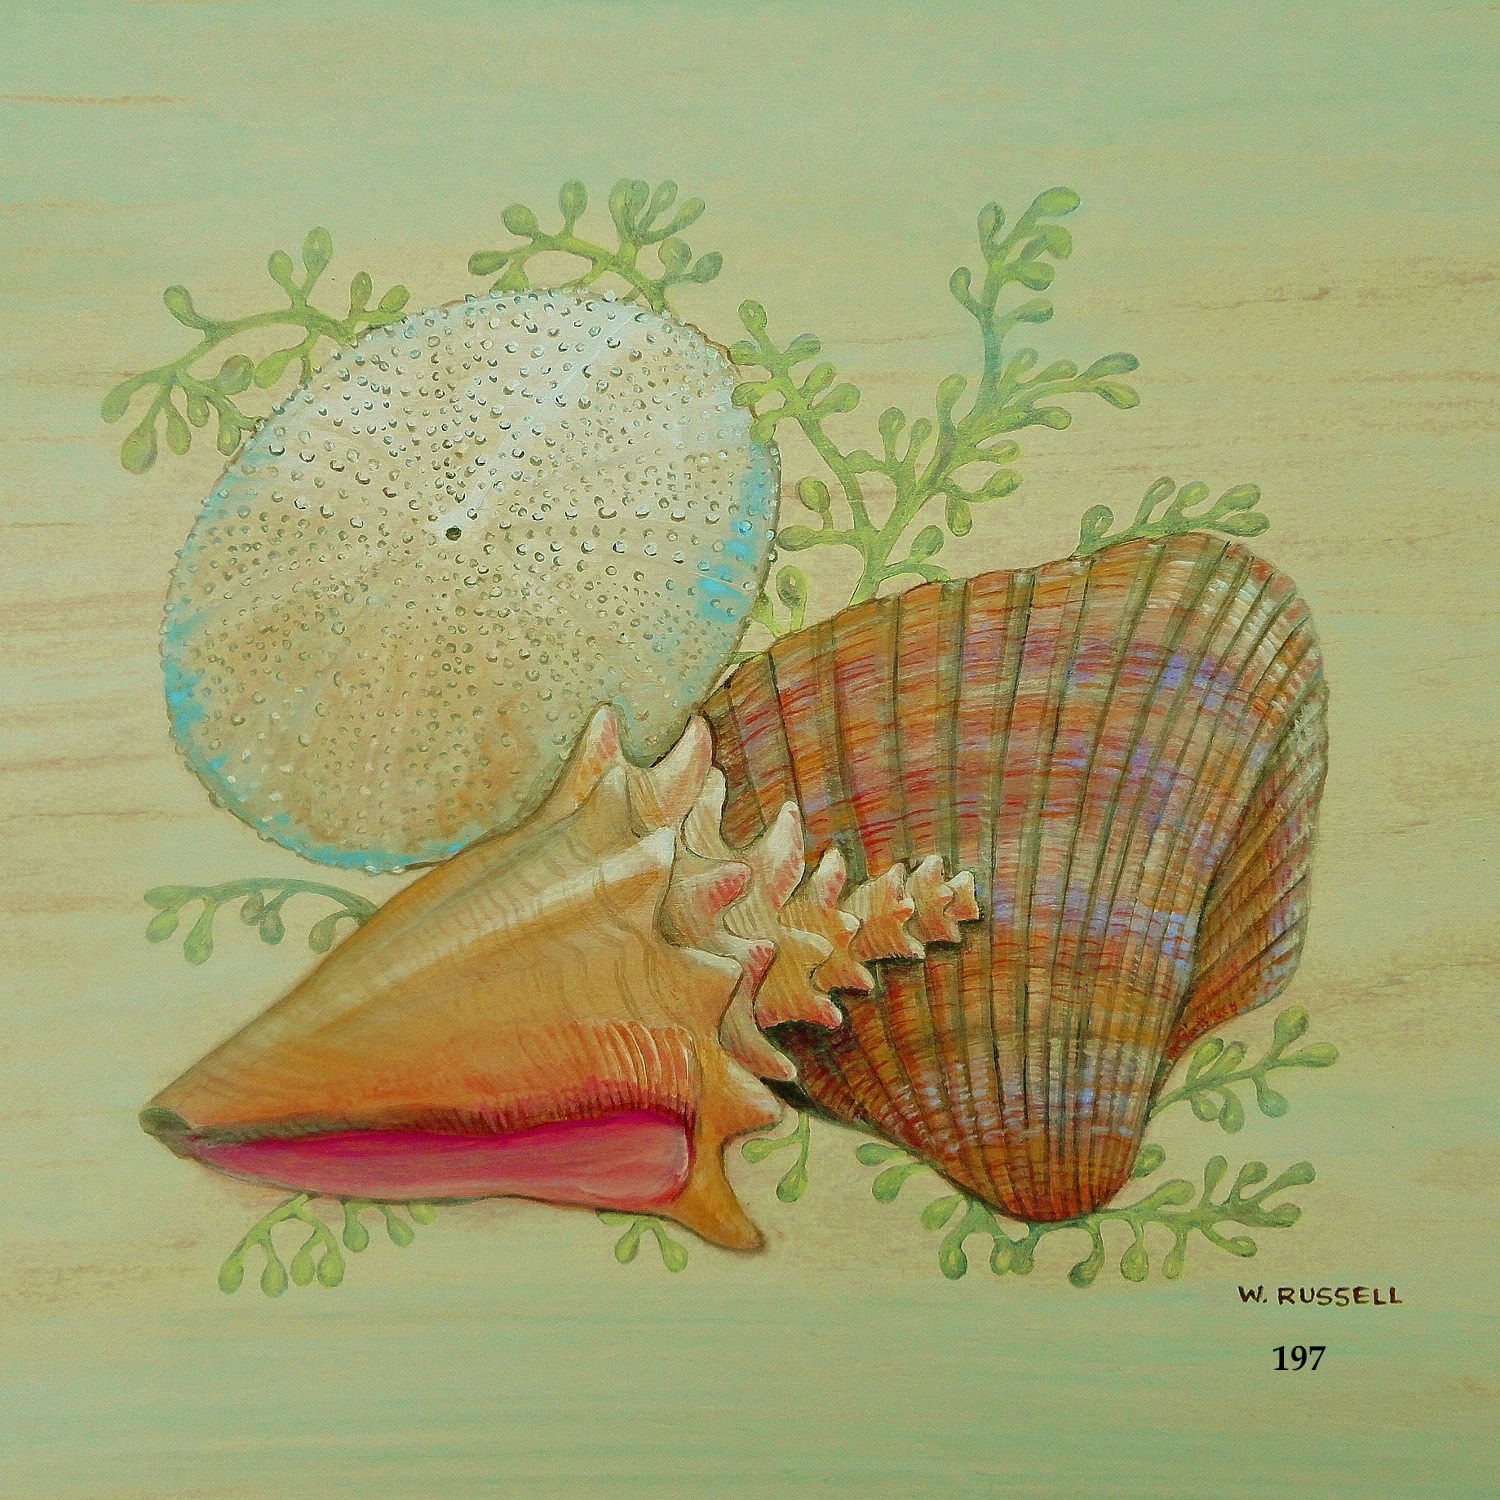 Seashell Trios Series with Conch Shell with ocean plant life.